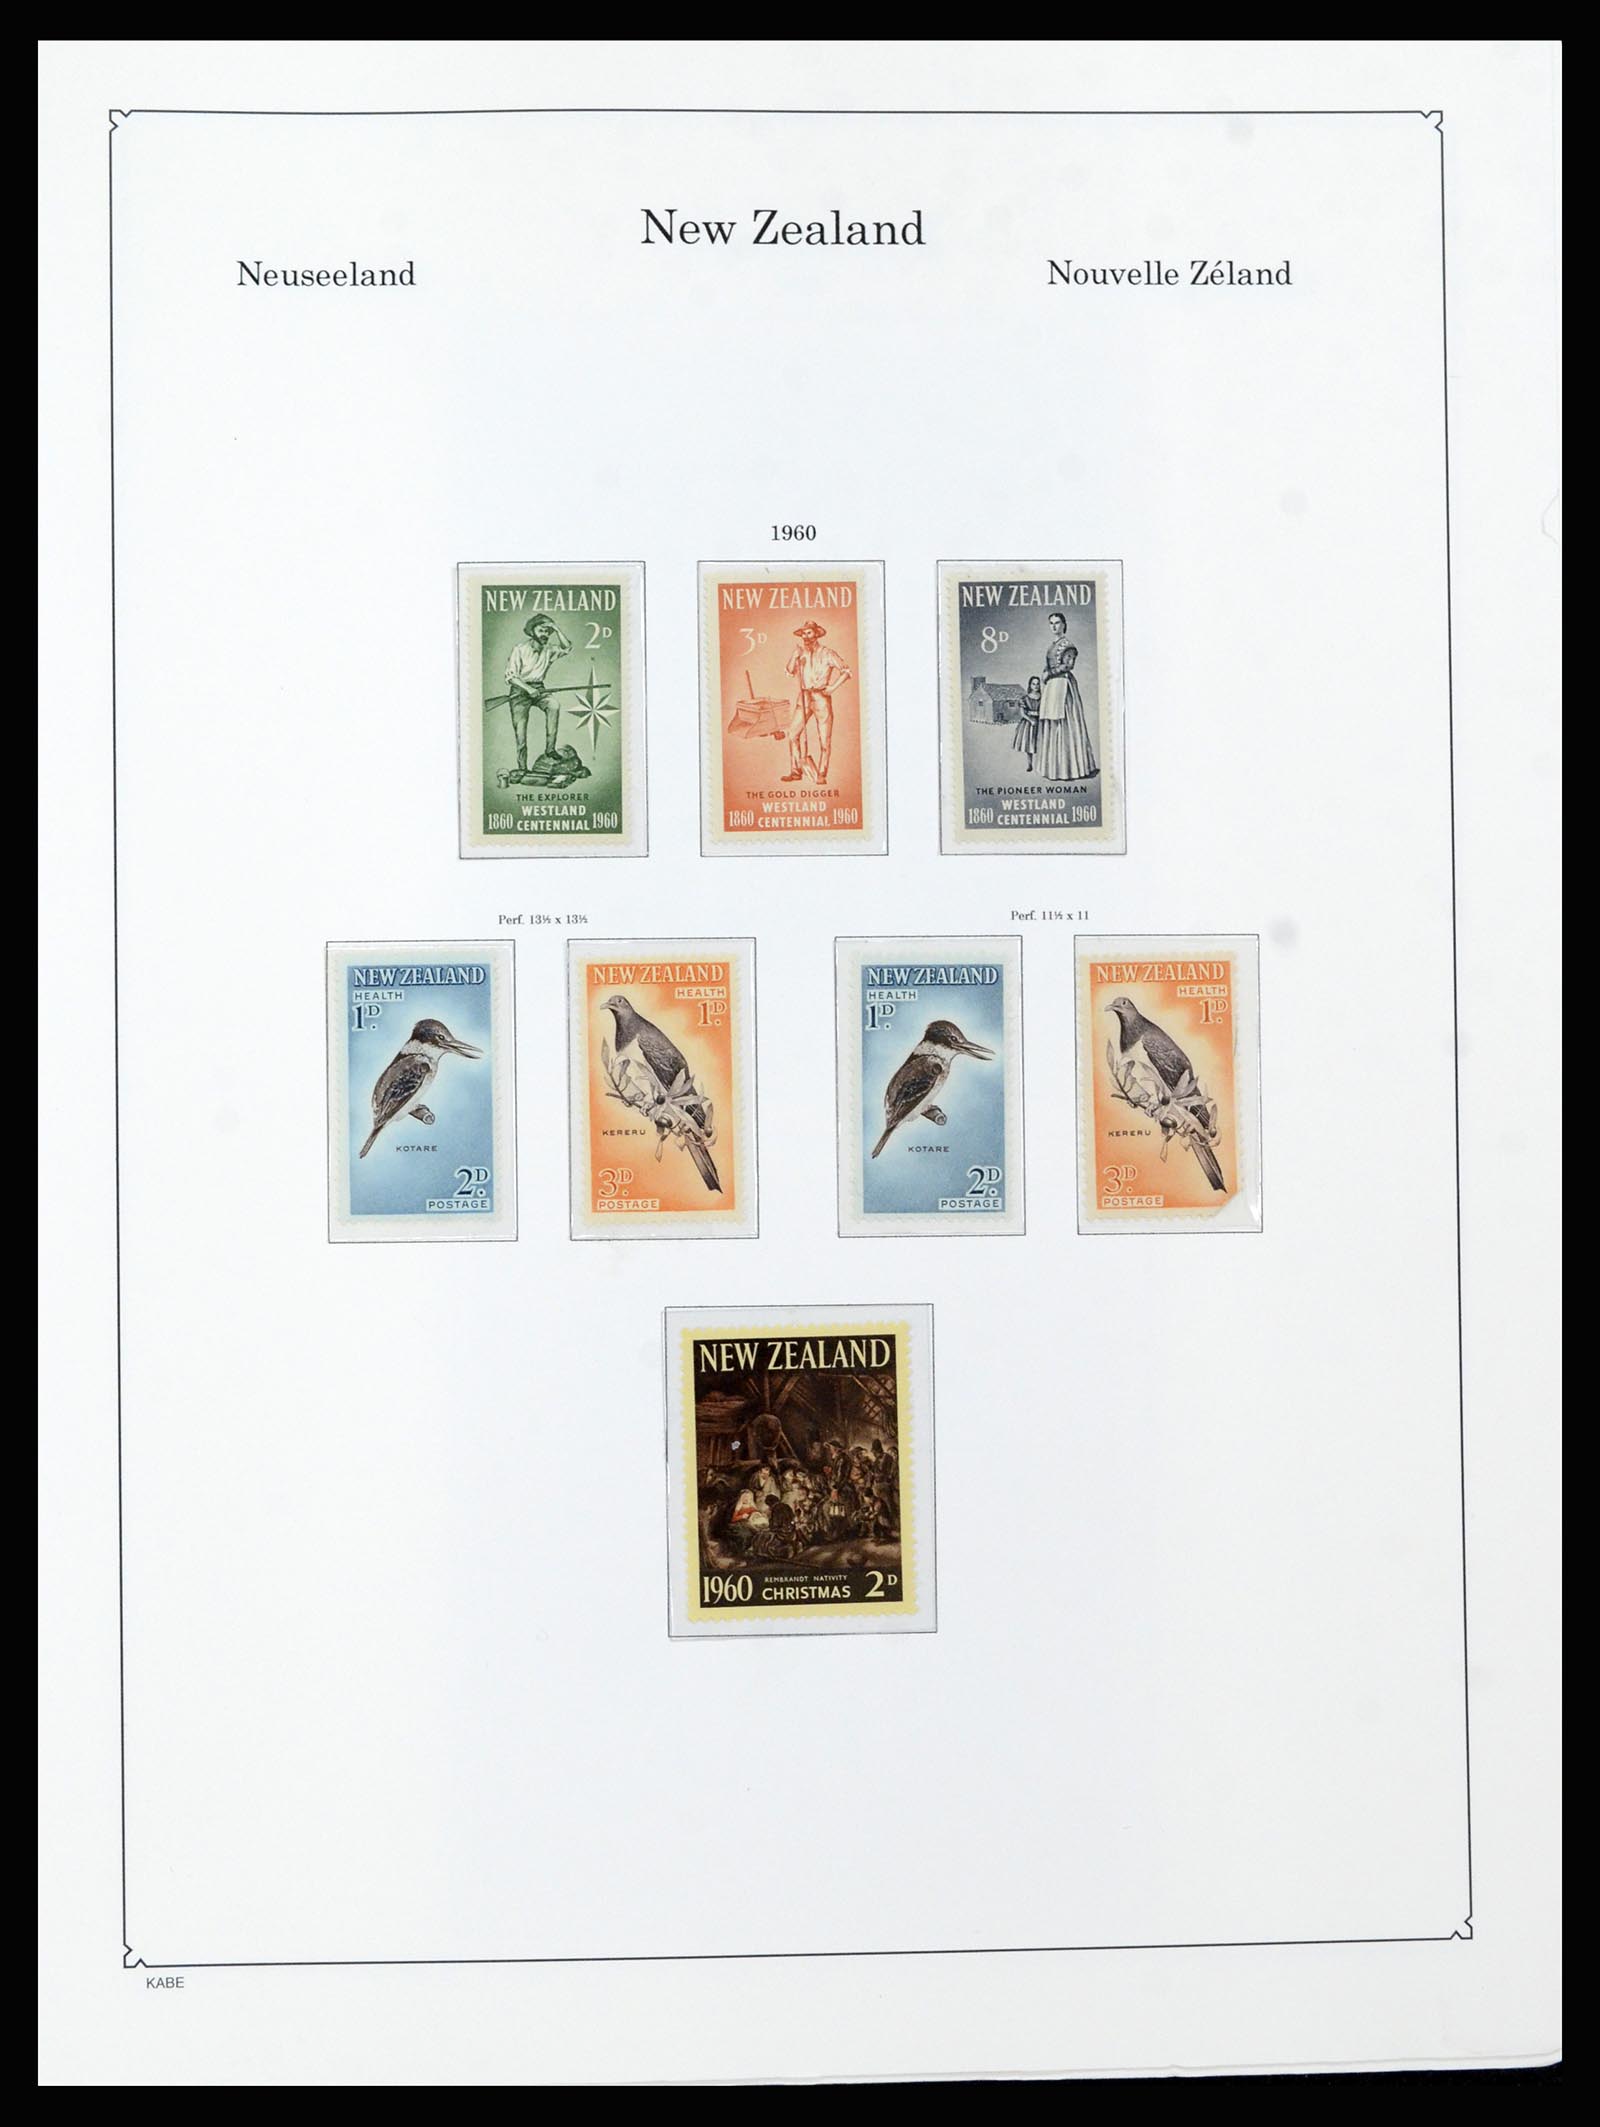 37148 058 - Stamp collection 37148 New Zealand specialised collection 1953-1995.